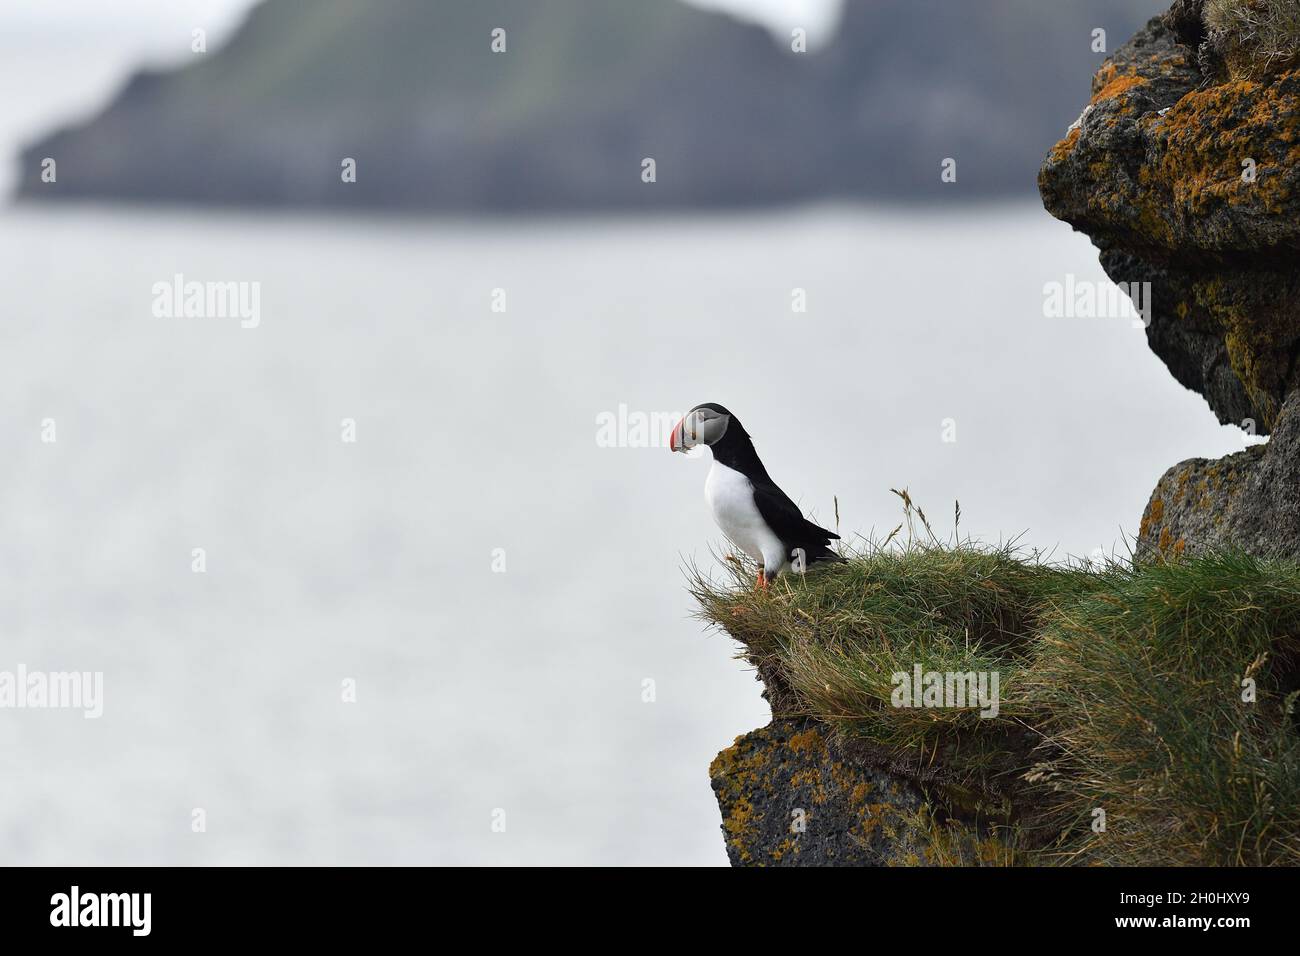 Atlantic puffin standing on the edge of a cliff beak full of fish. Stock Photo